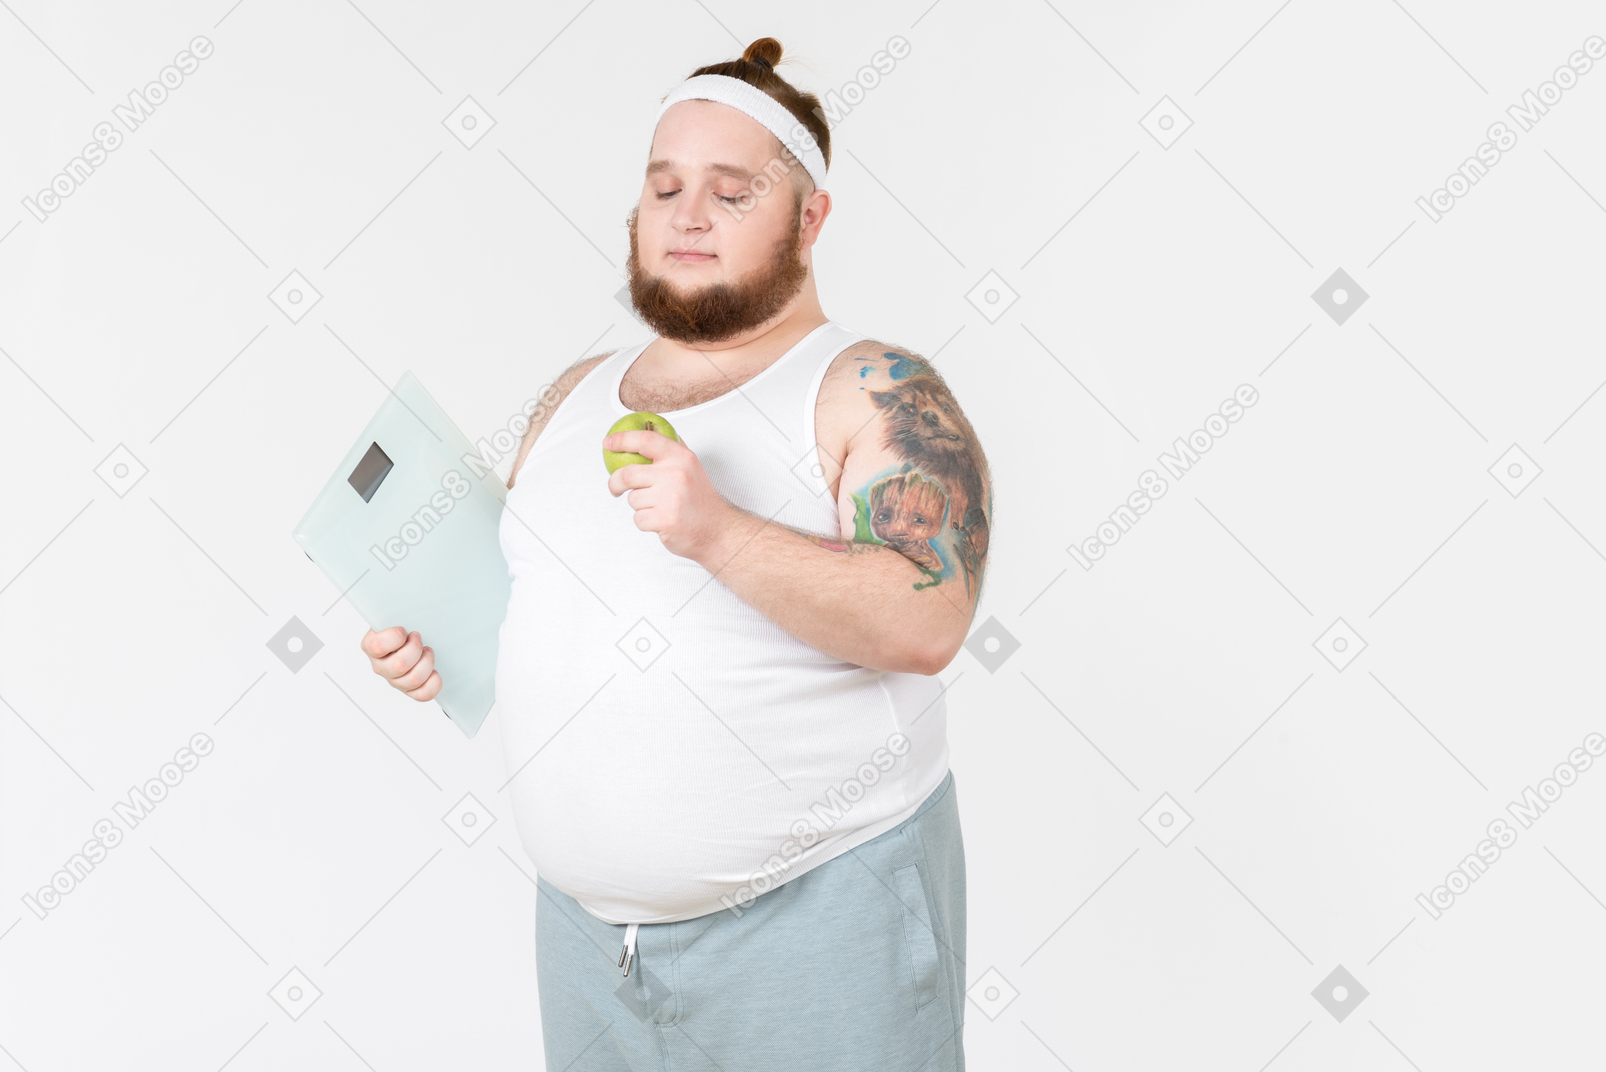 Big guy in sportswear holding digital weights and looking seriously at apple he's holding